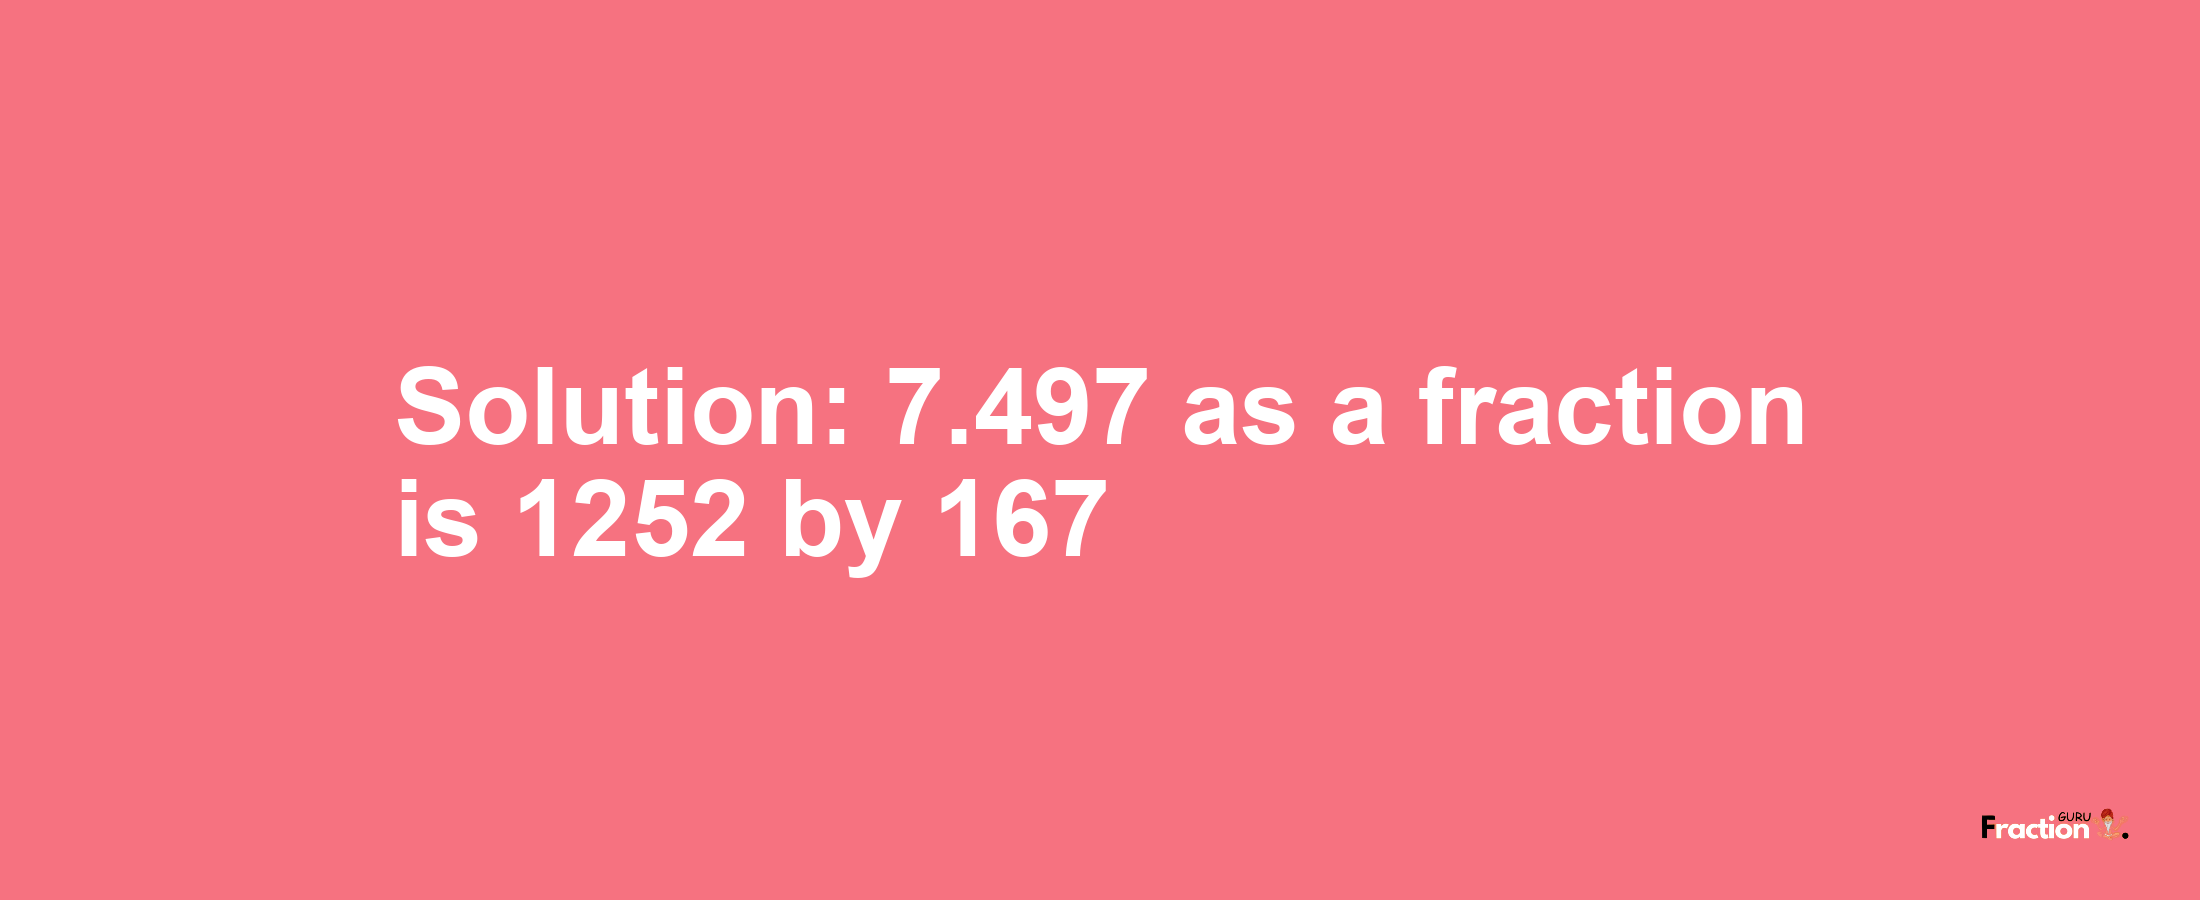 Solution:7.497 as a fraction is 1252/167